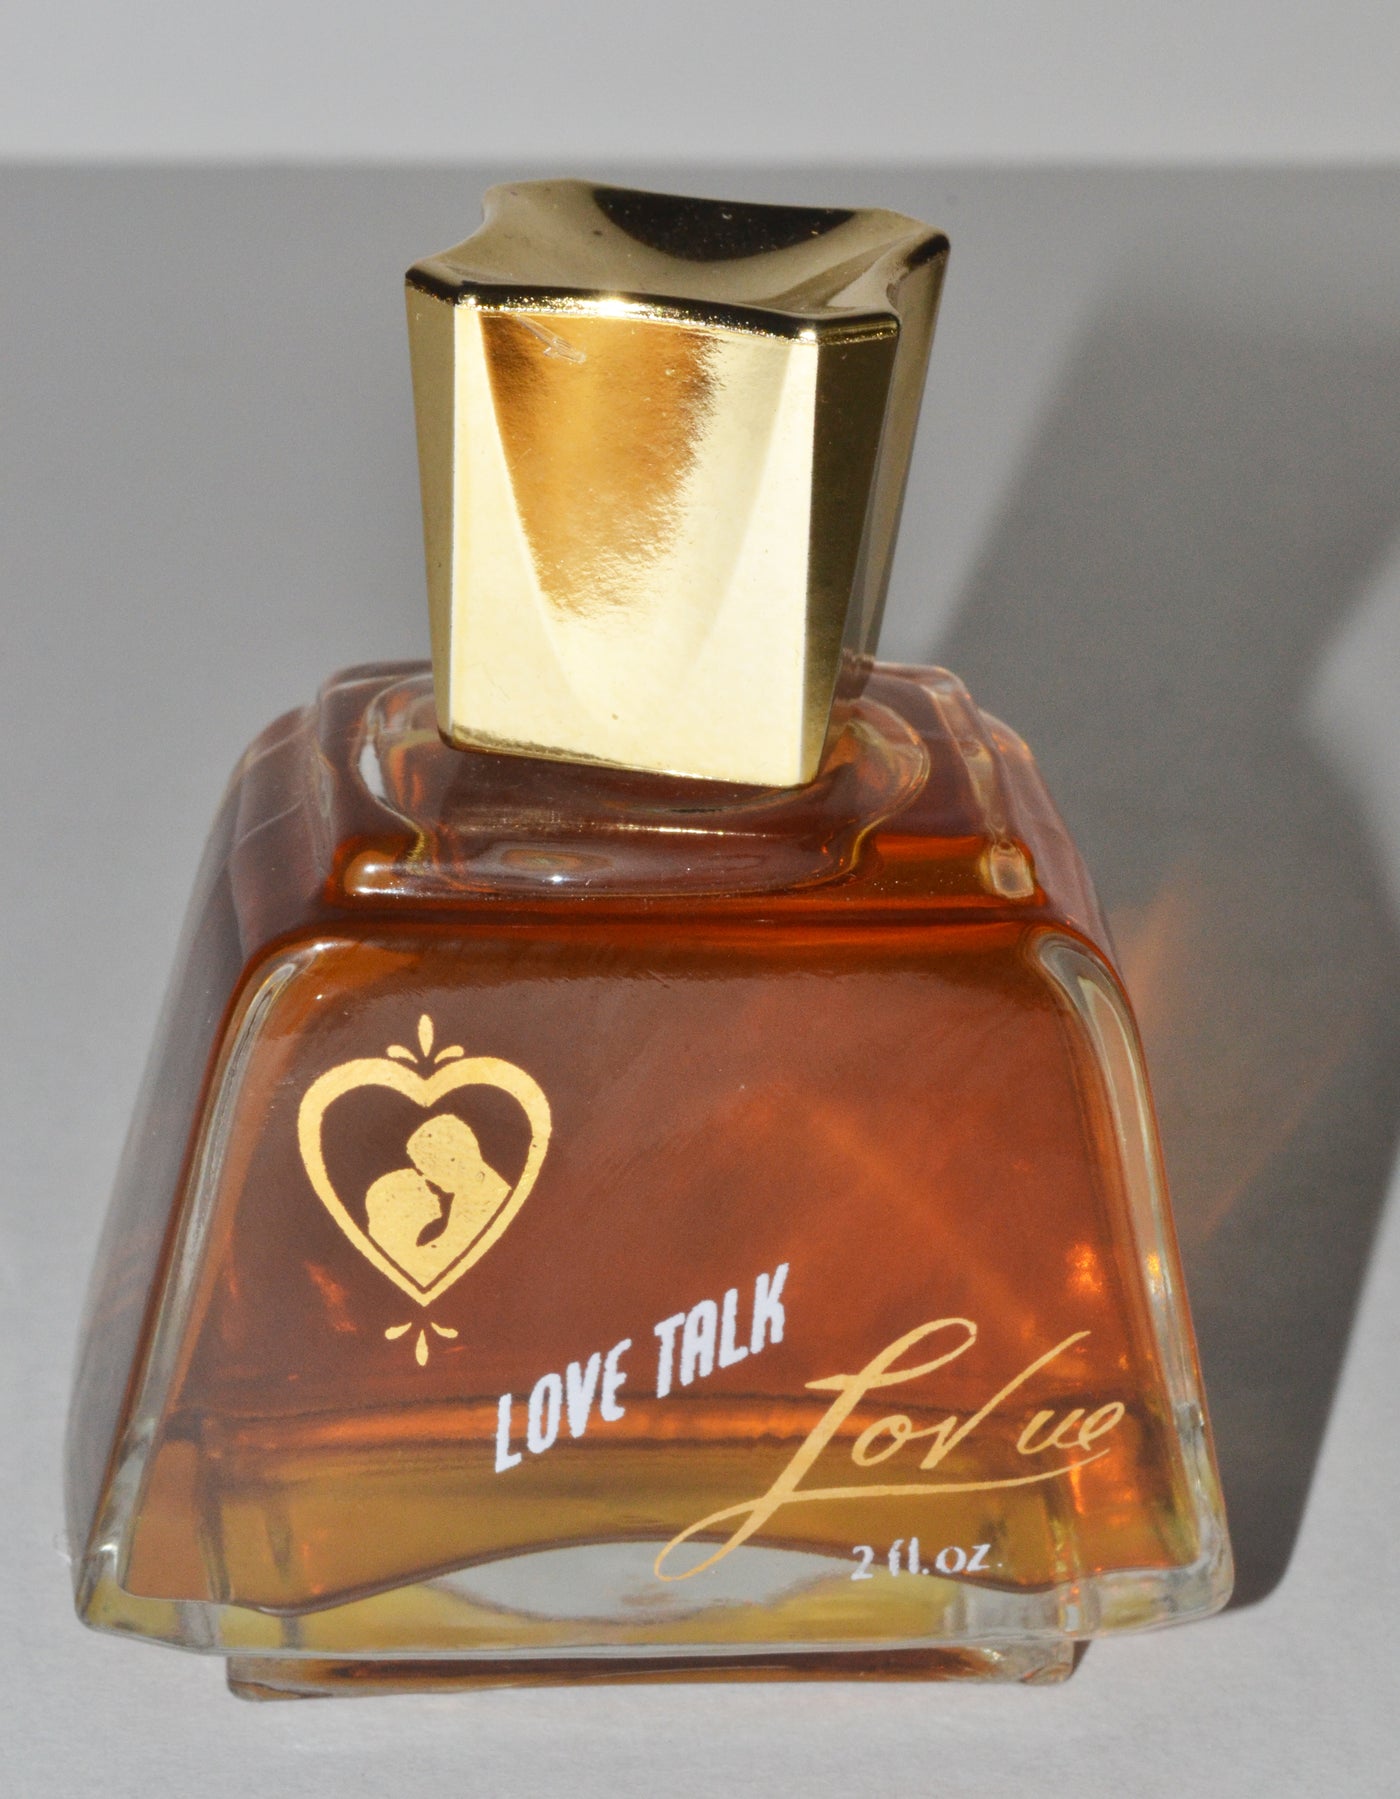 Love Talk “Lovue” Cologne By Shaklee